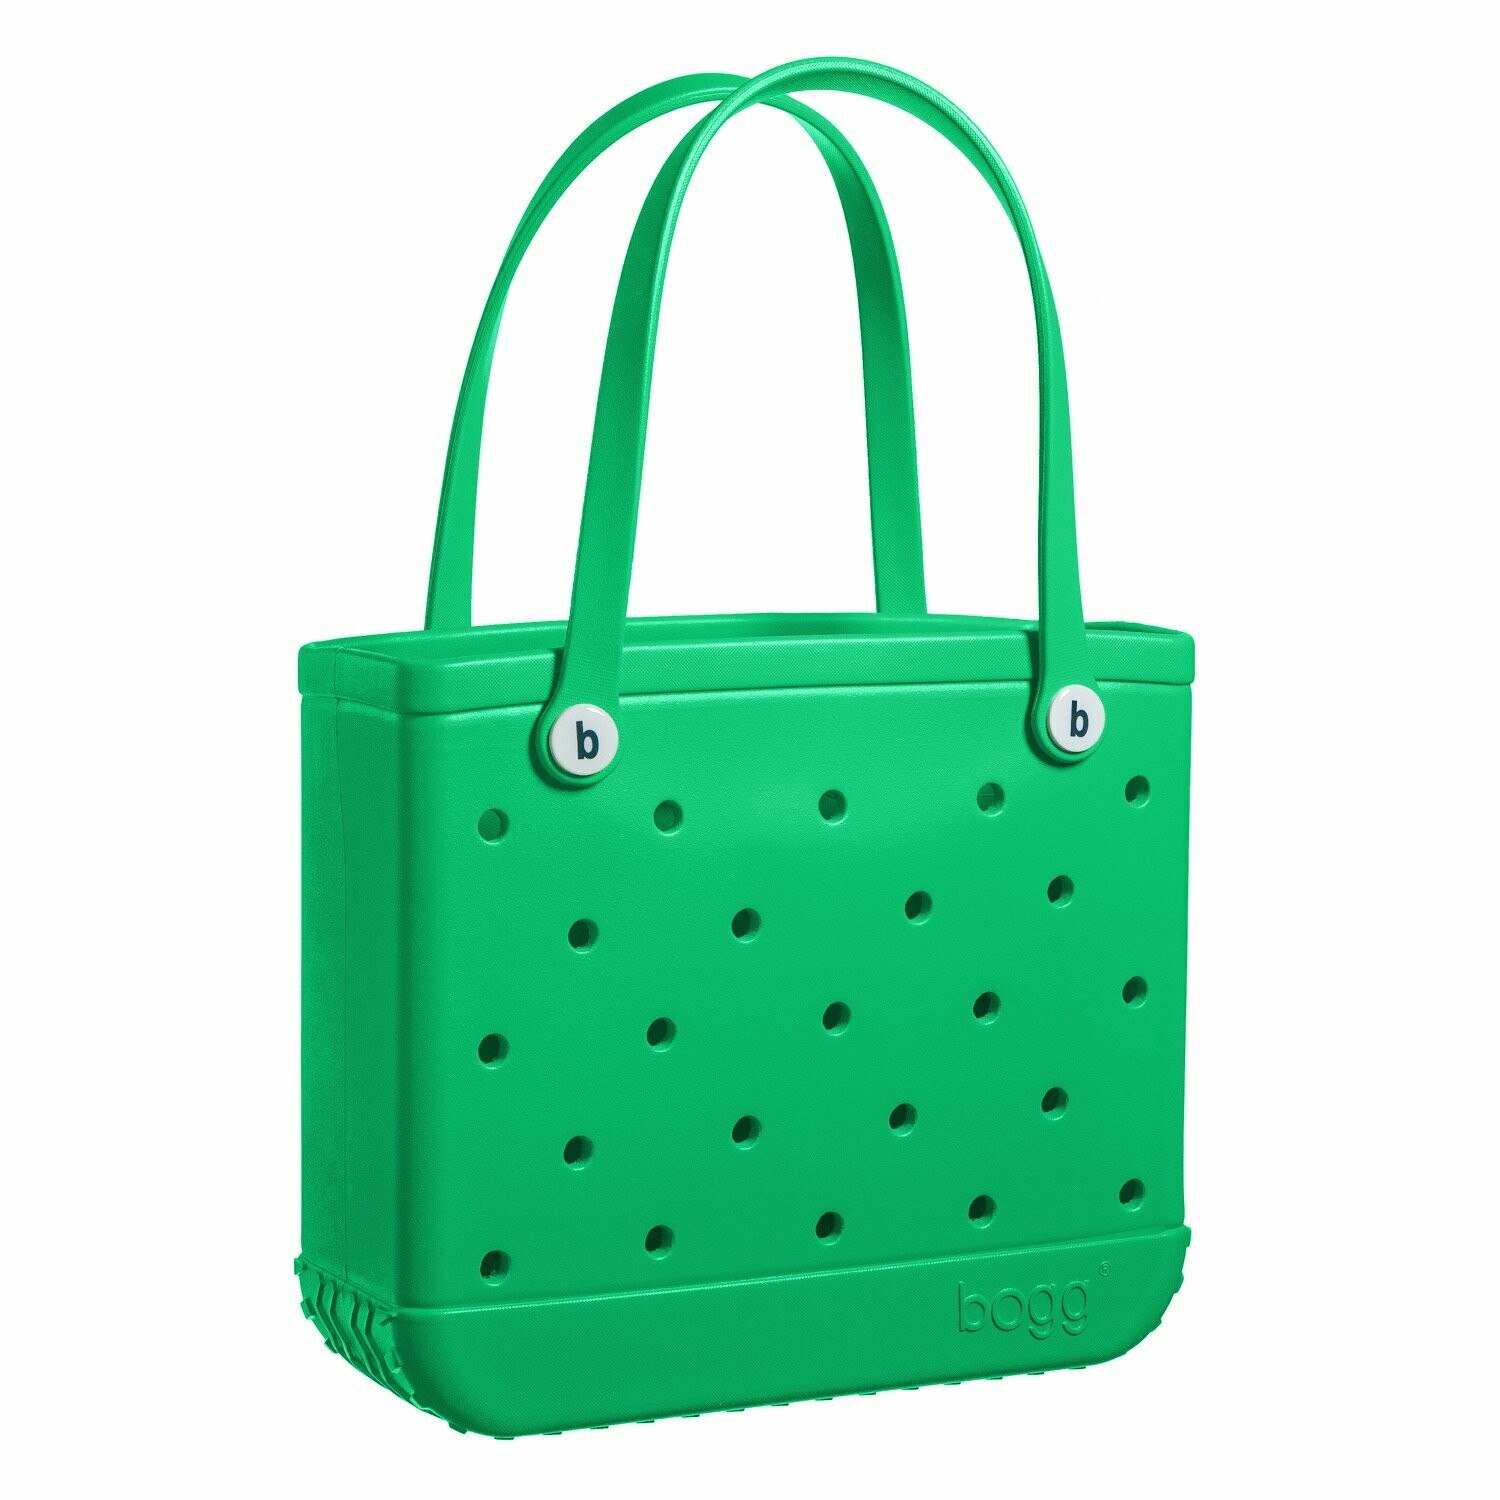 Green - Children's Bag  (same items plus an activity/coloring book)